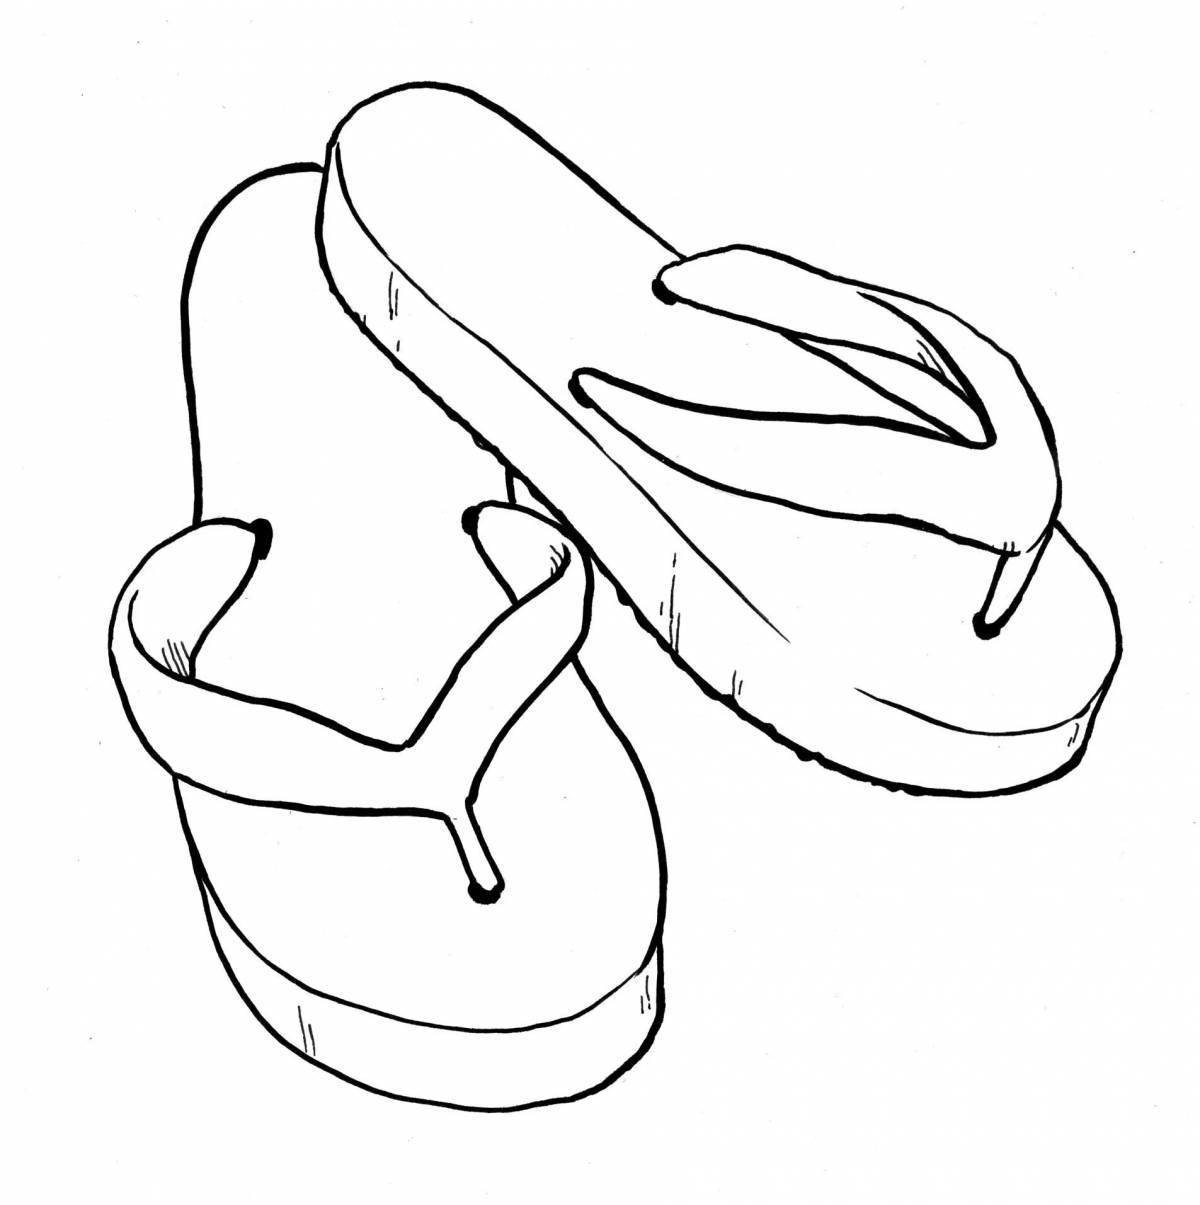 Coloring page inviting sandals